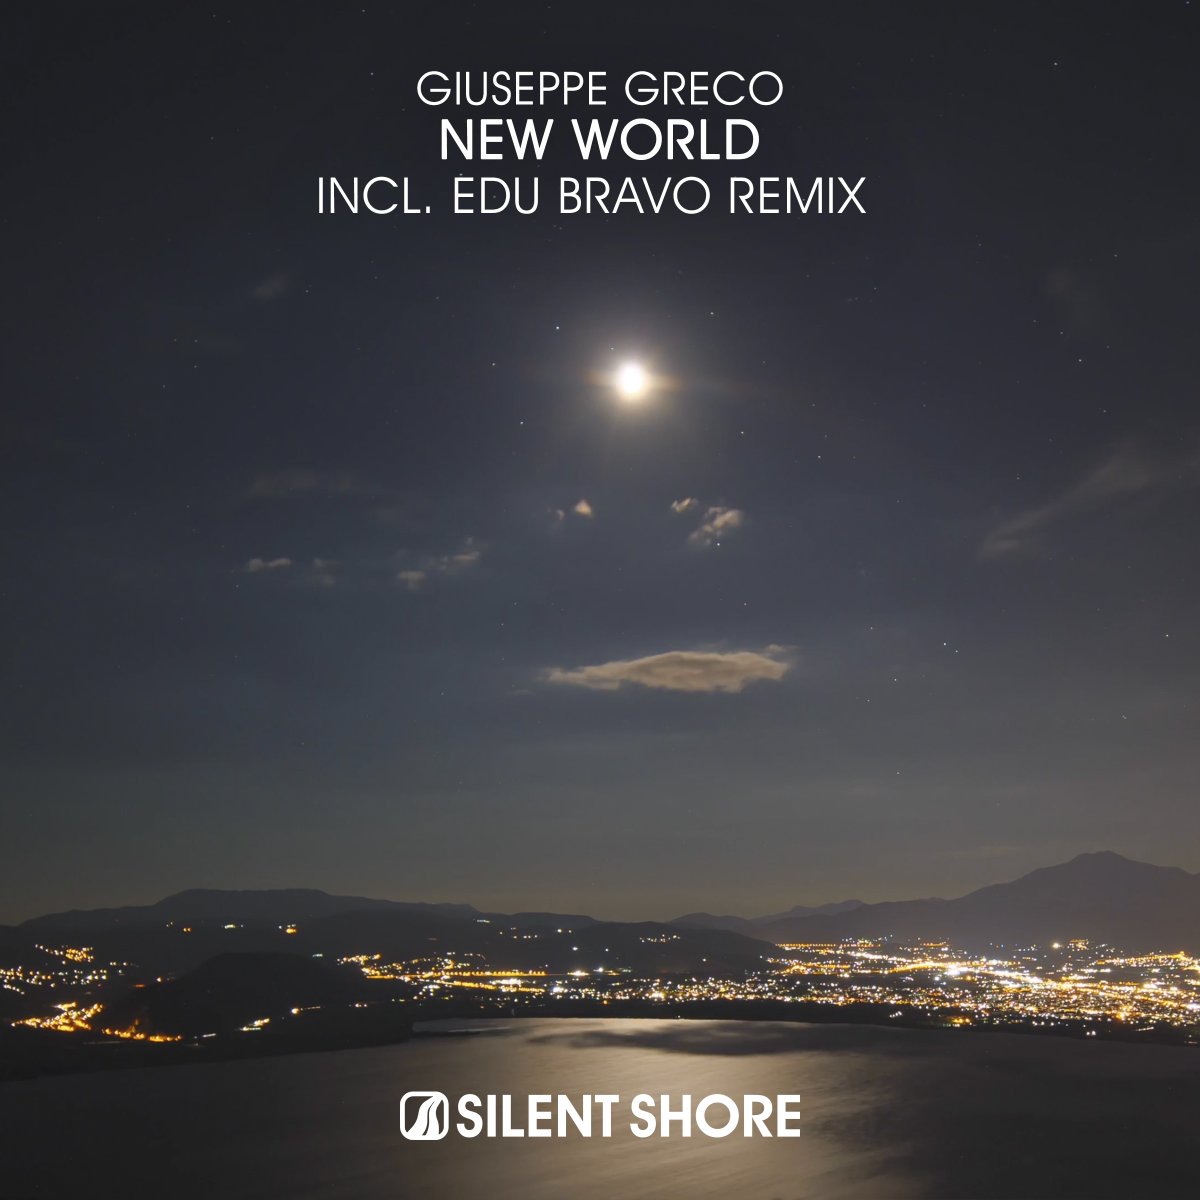 Silent Shore brings you a phenomenal release by the Italian producer Giuseppe Greco in the form of ‘New World’. The release includes a great remix by the Spanish talent Edu Bravo.